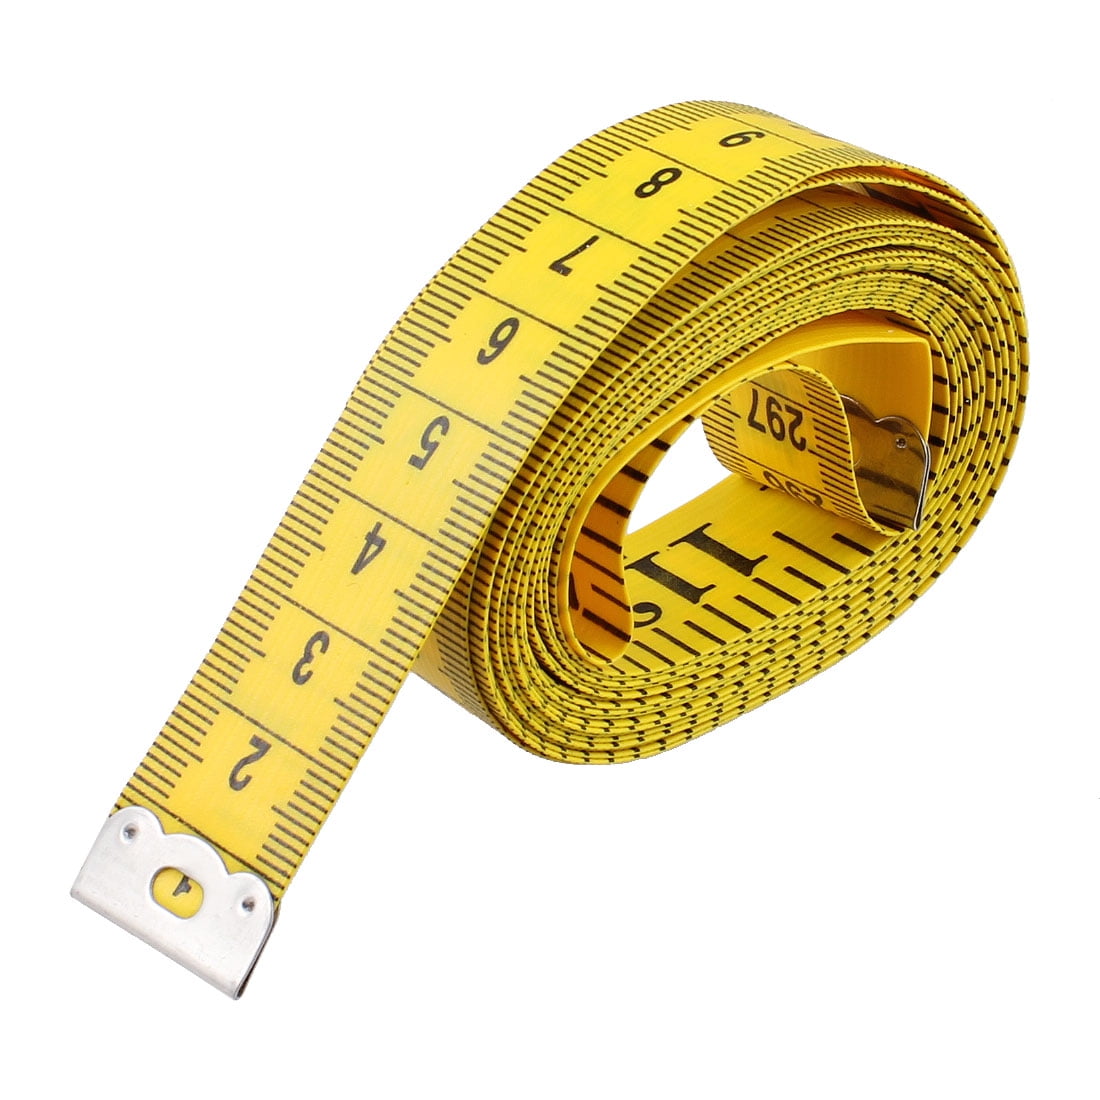 TAPE MEASURES 60 INCH 150 CM SEWING  CRAFTS TAILOR SET OF 3 SEAMSTRESS TAPES 